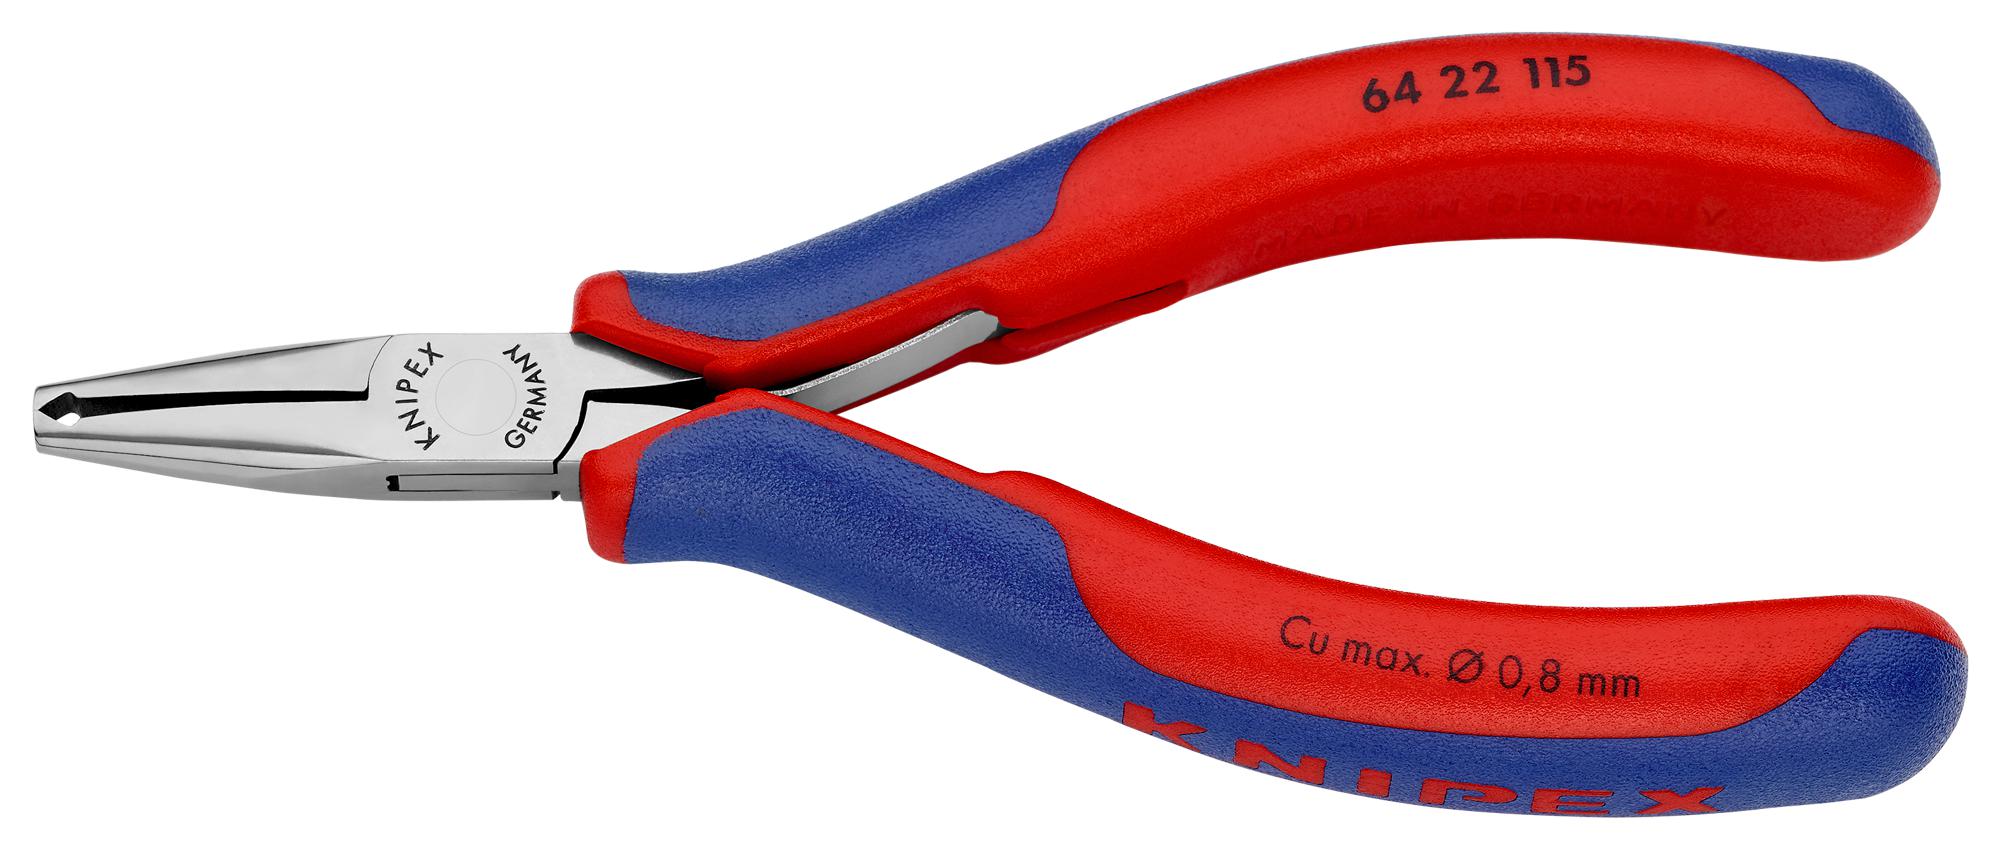 Knipex 64 22 115 Cutters, Oblique 115mm